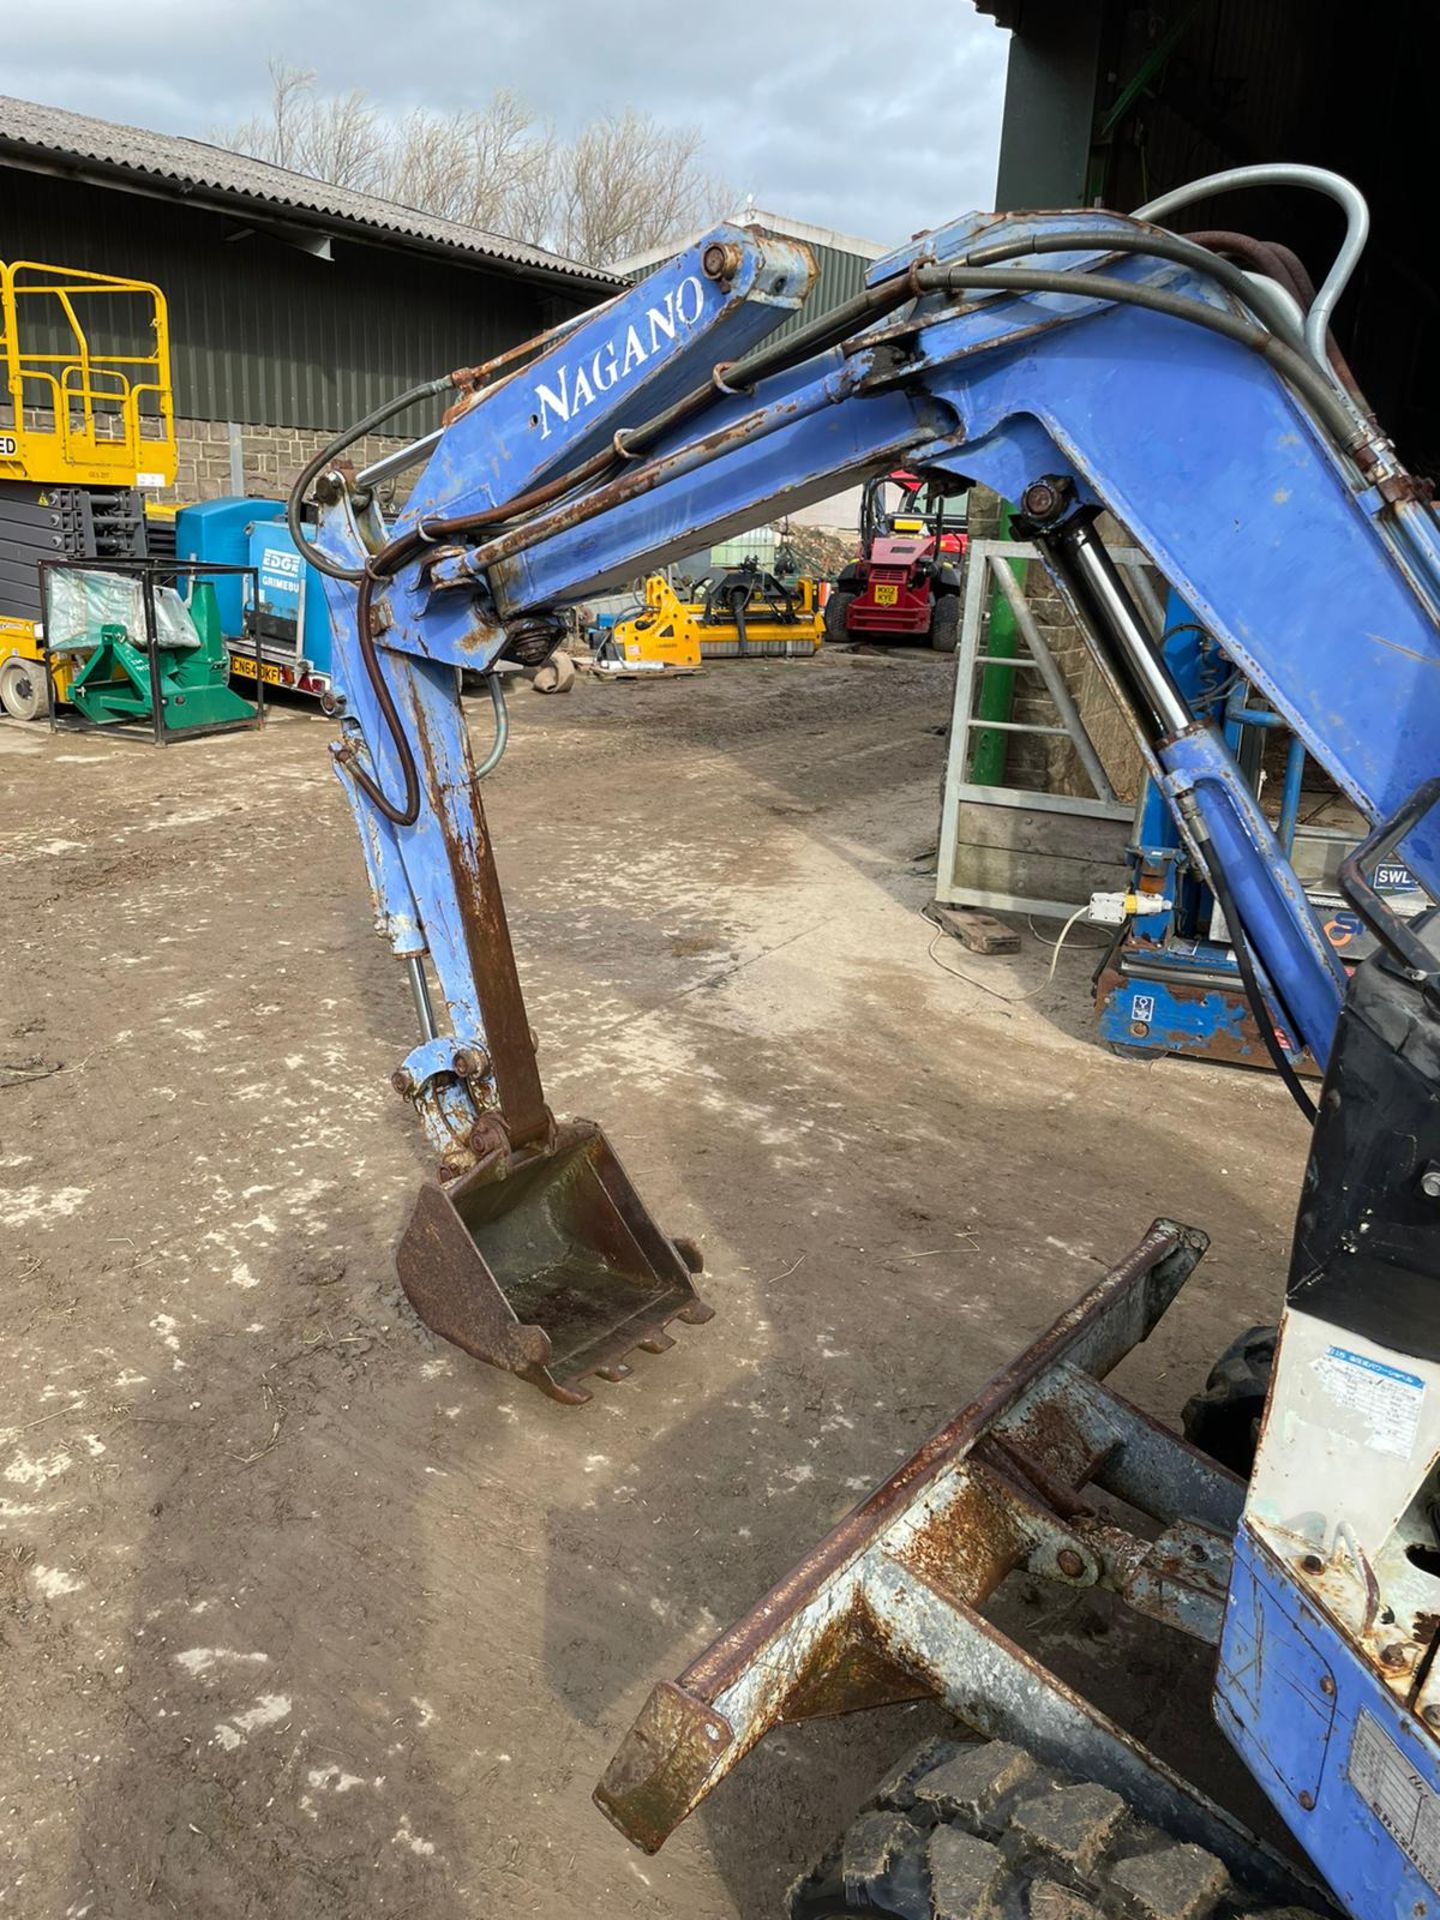 NAGNAO N&B15 MINI EXCAVATOR / DIGGER, RUNS, DRIVES AND DIGS, IN USED BUT GOOD CONDITION *PLUS VAT* - Image 6 of 16